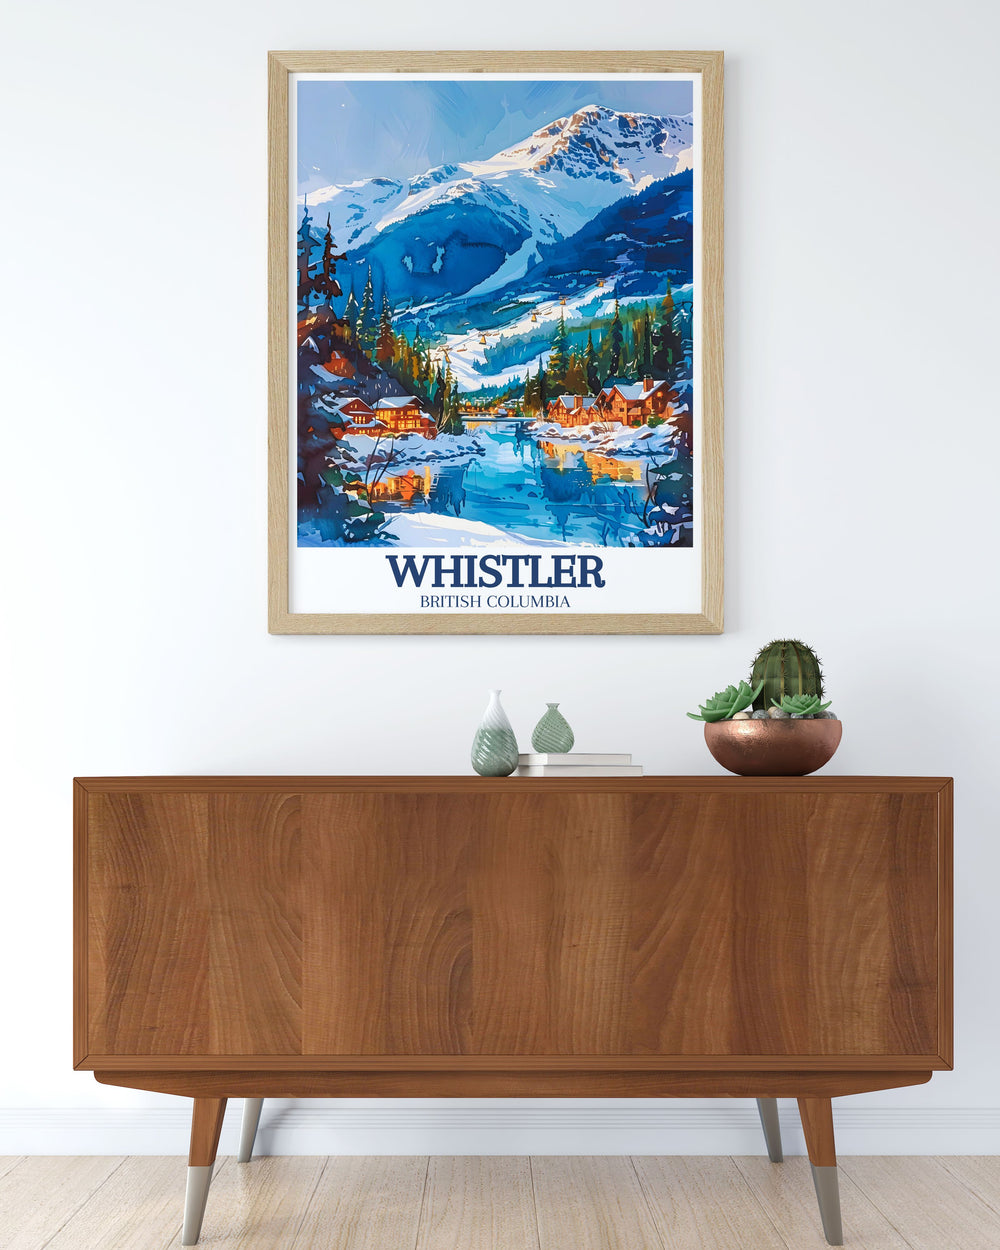 Whistler art print featuring the stunning alpine landscape of the Coast Mountains capturing the essence of this iconic destination ideal for ski enthusiasts and nature lovers.